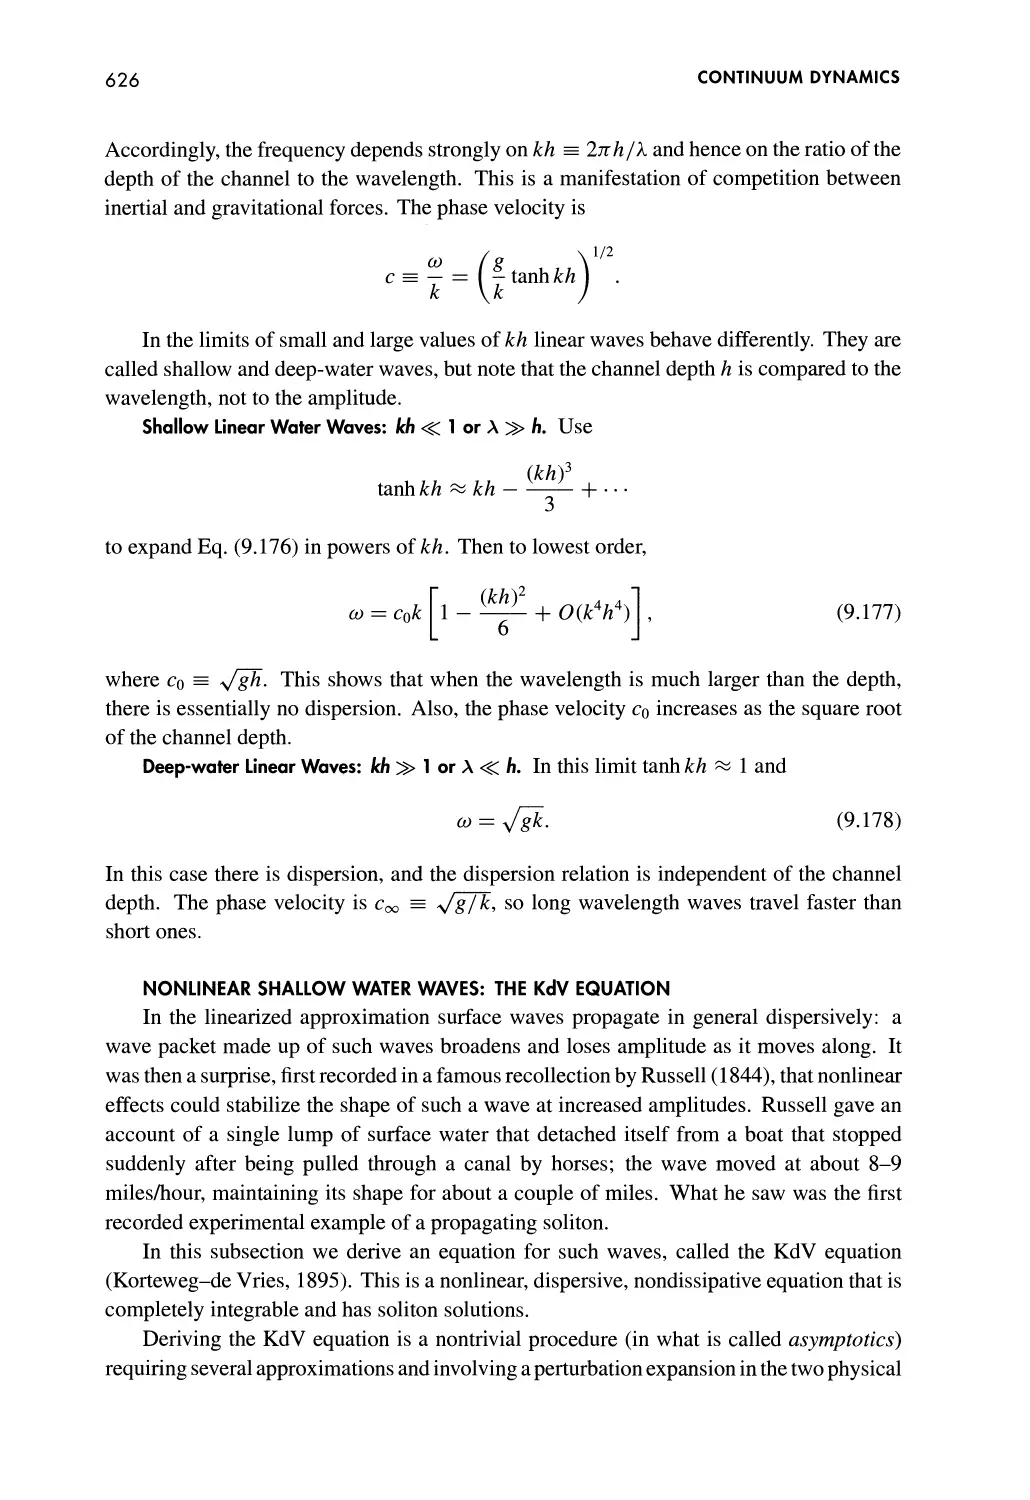 Nonlinear Shallow Water Waves: the KdV Equation